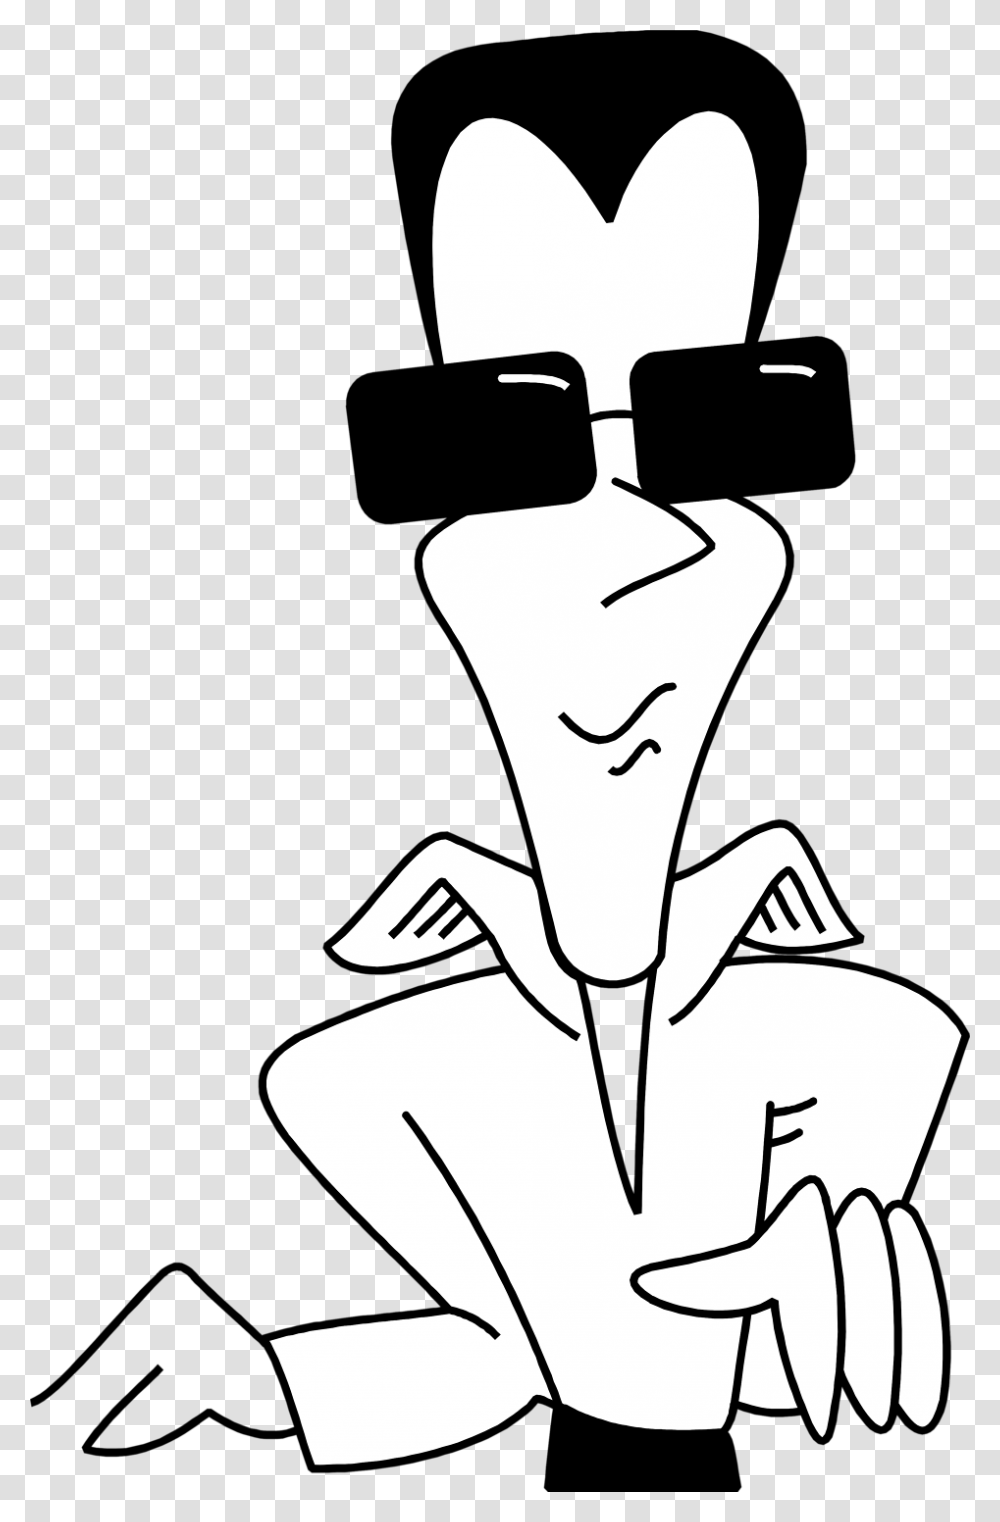 Cool Glasses Cool Guy Cartoon Black And White, Stencil Transparent Png